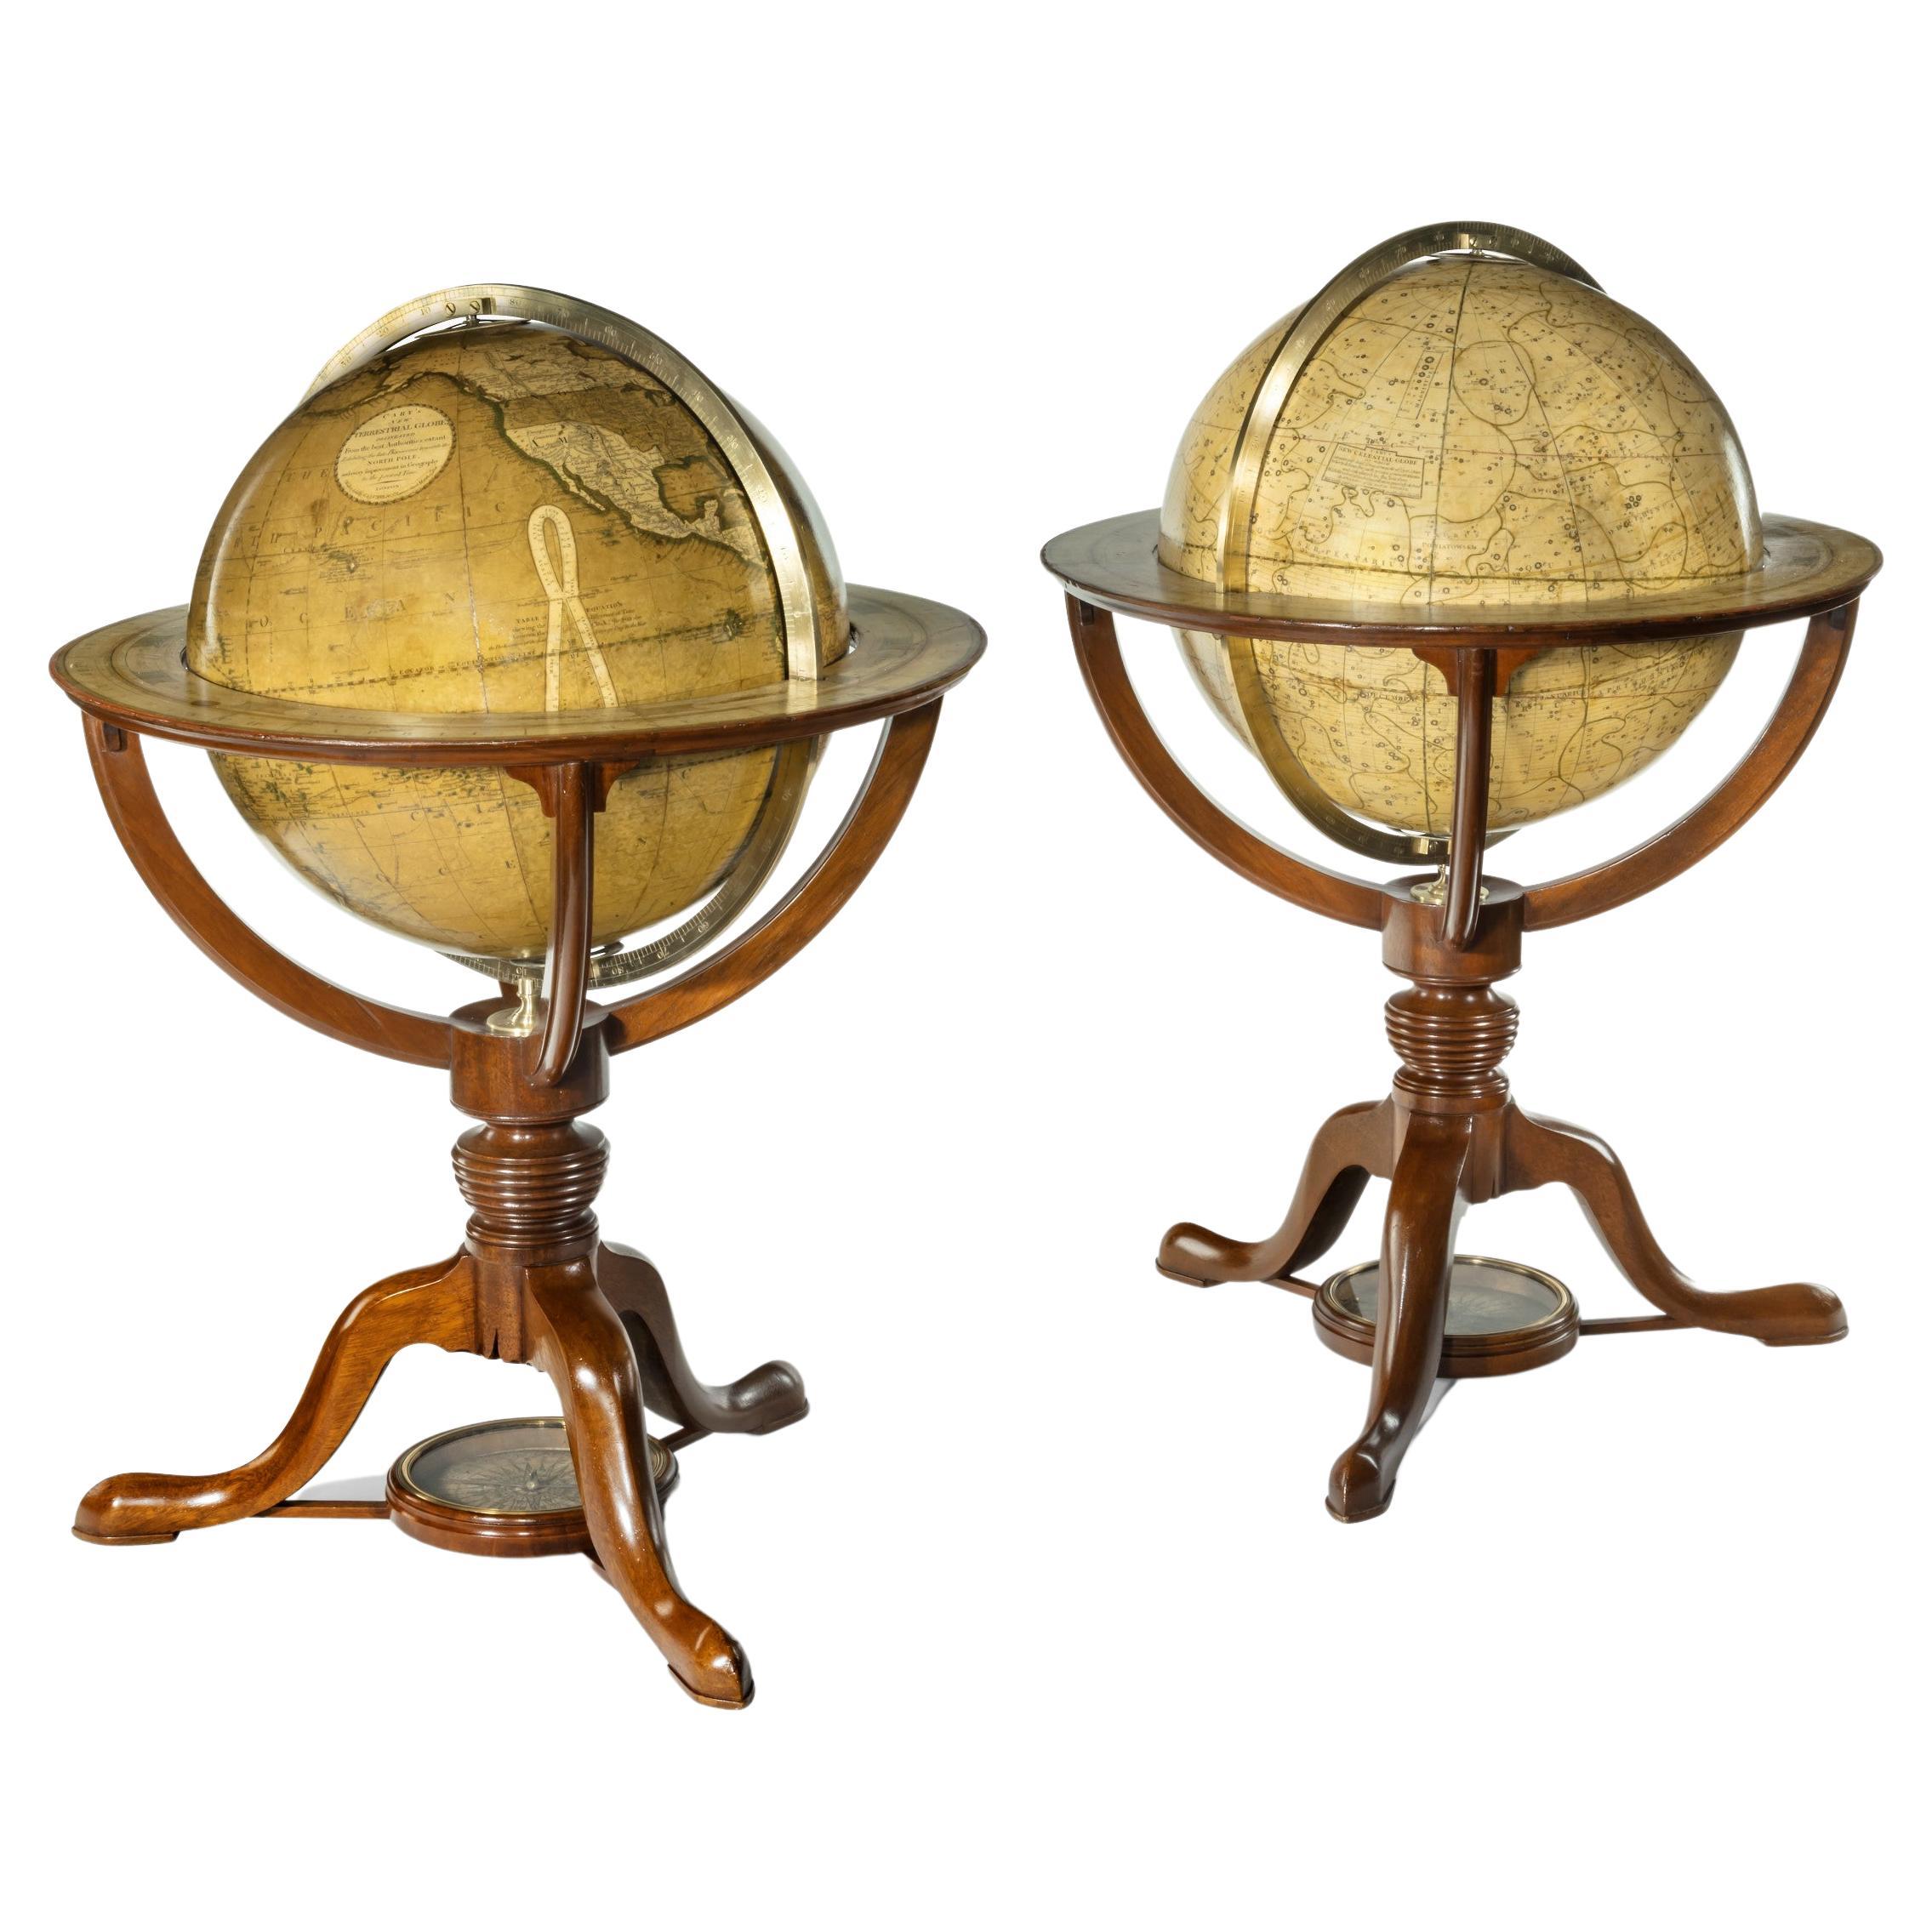 Pair of Table Globes by G & J Cary, Dated 1800 and 1821